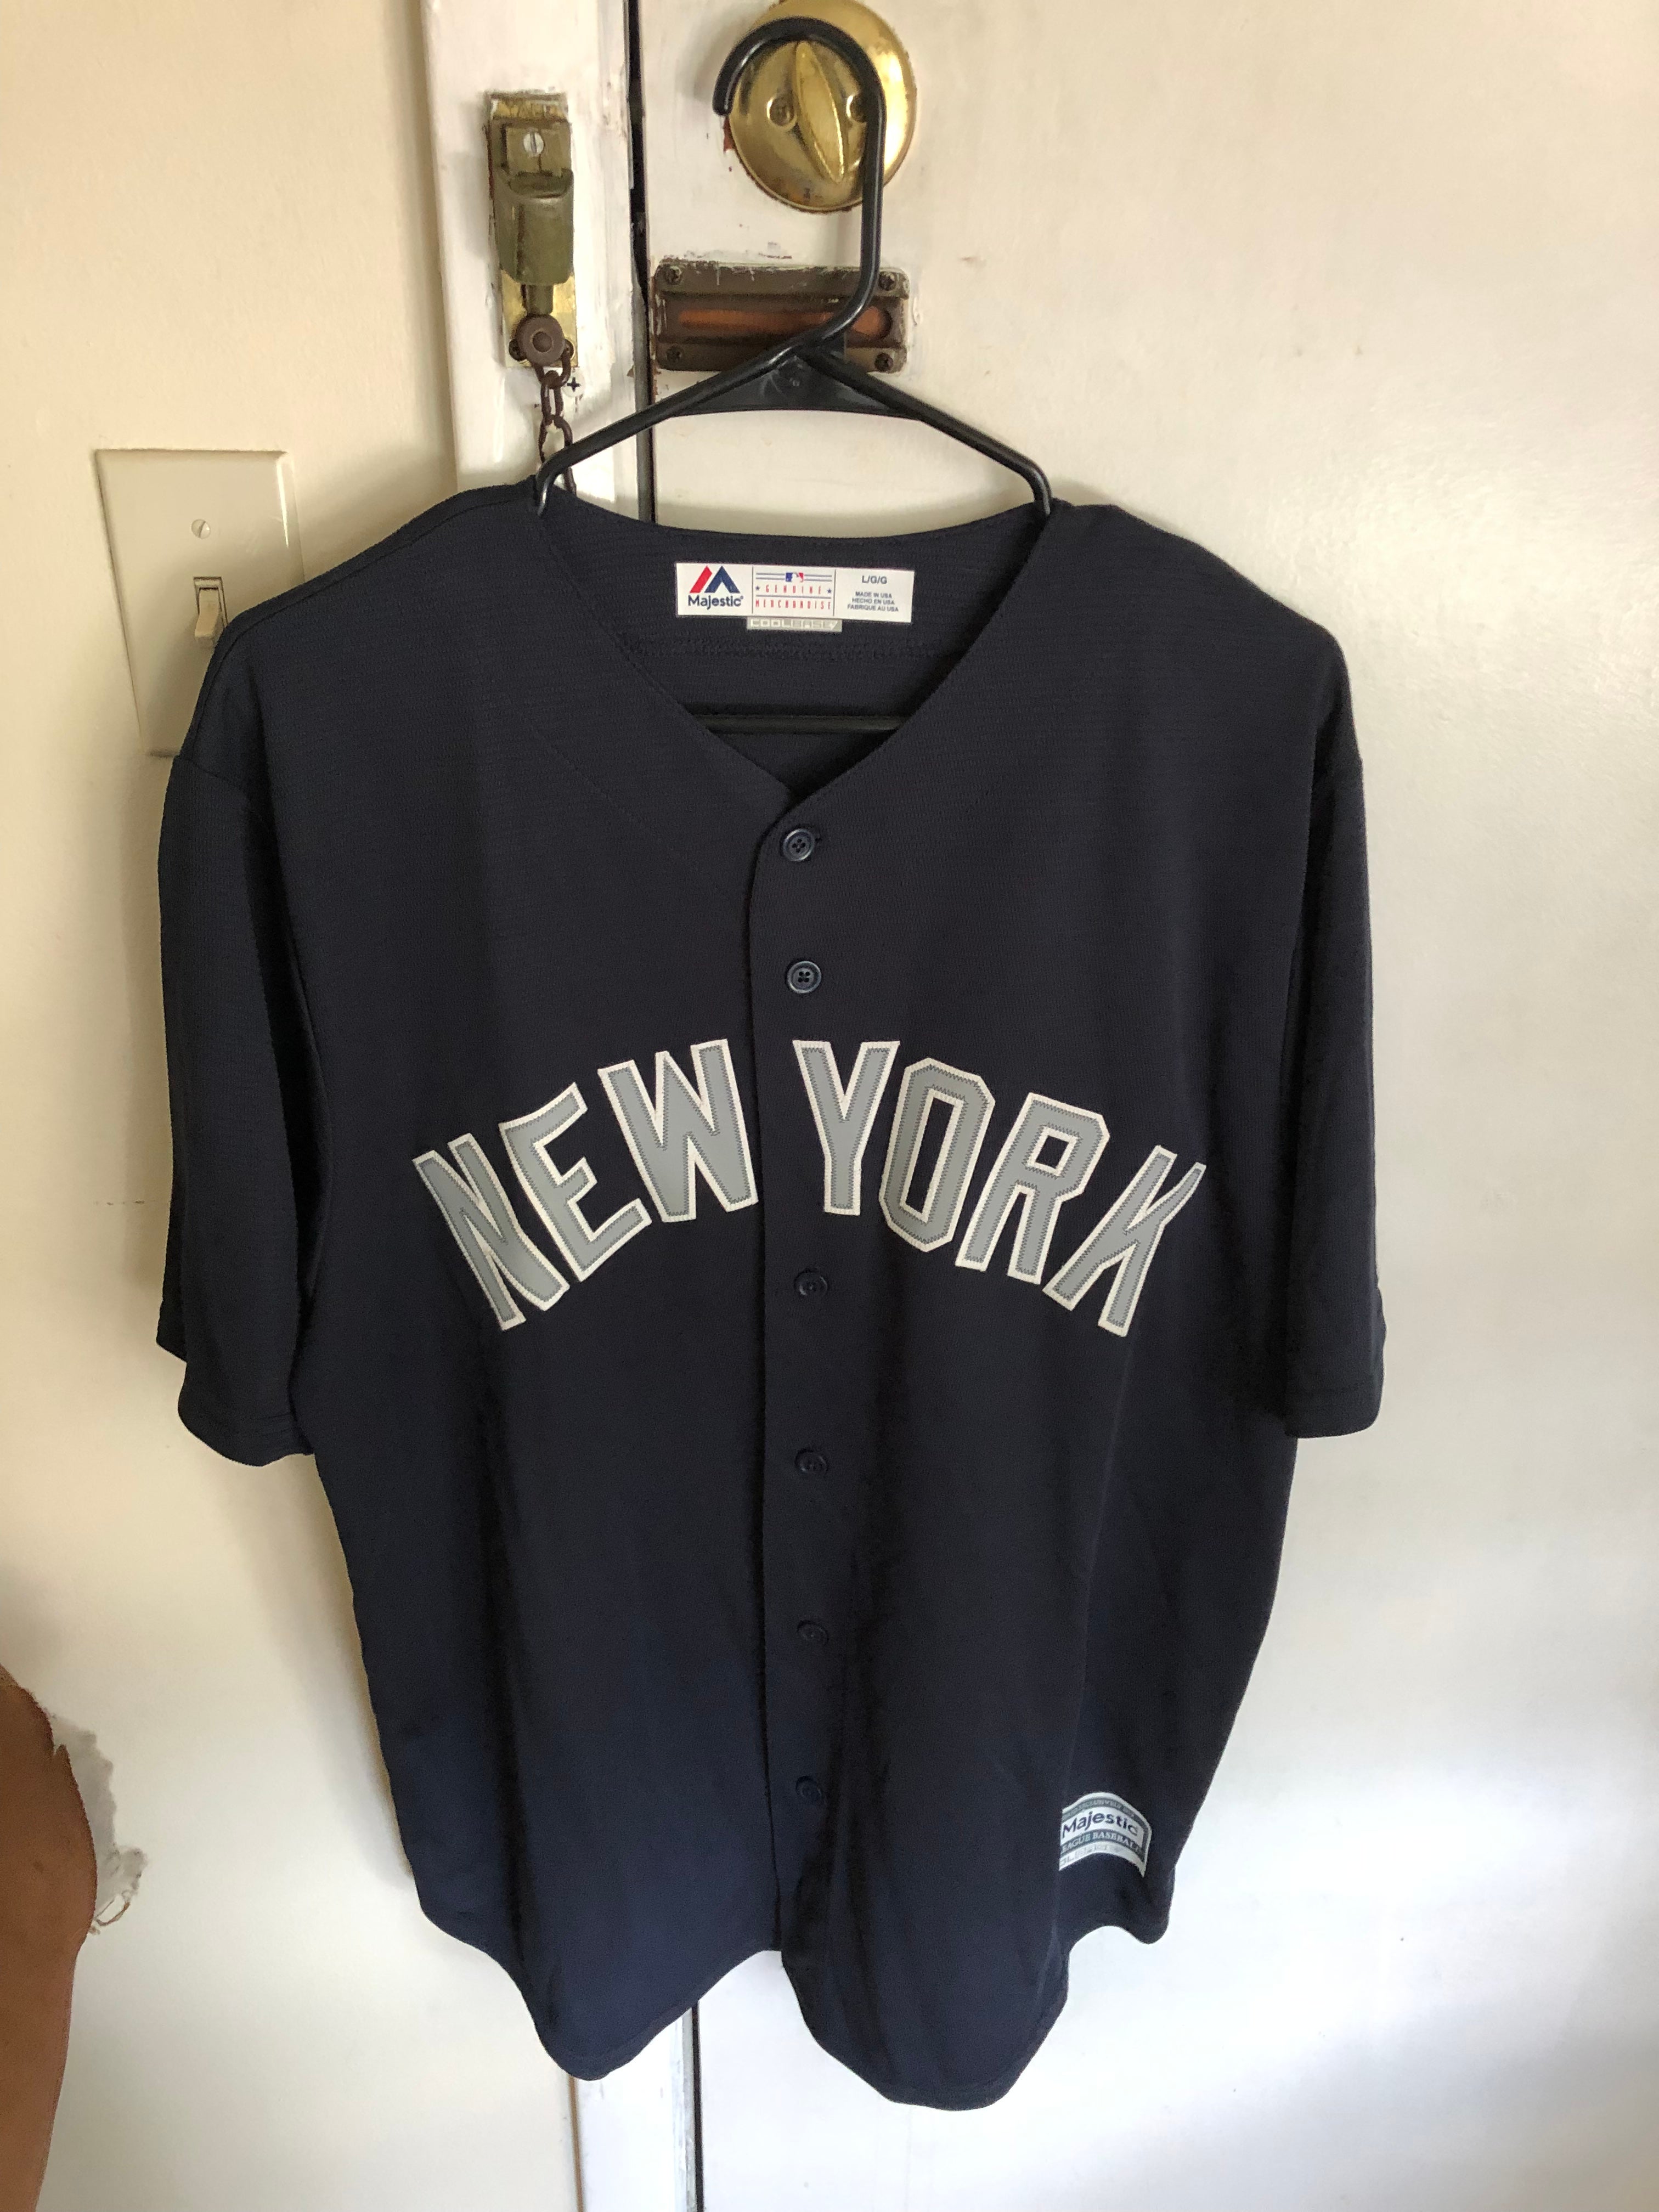 New York Yankees Women's Home Jersey by Majestic